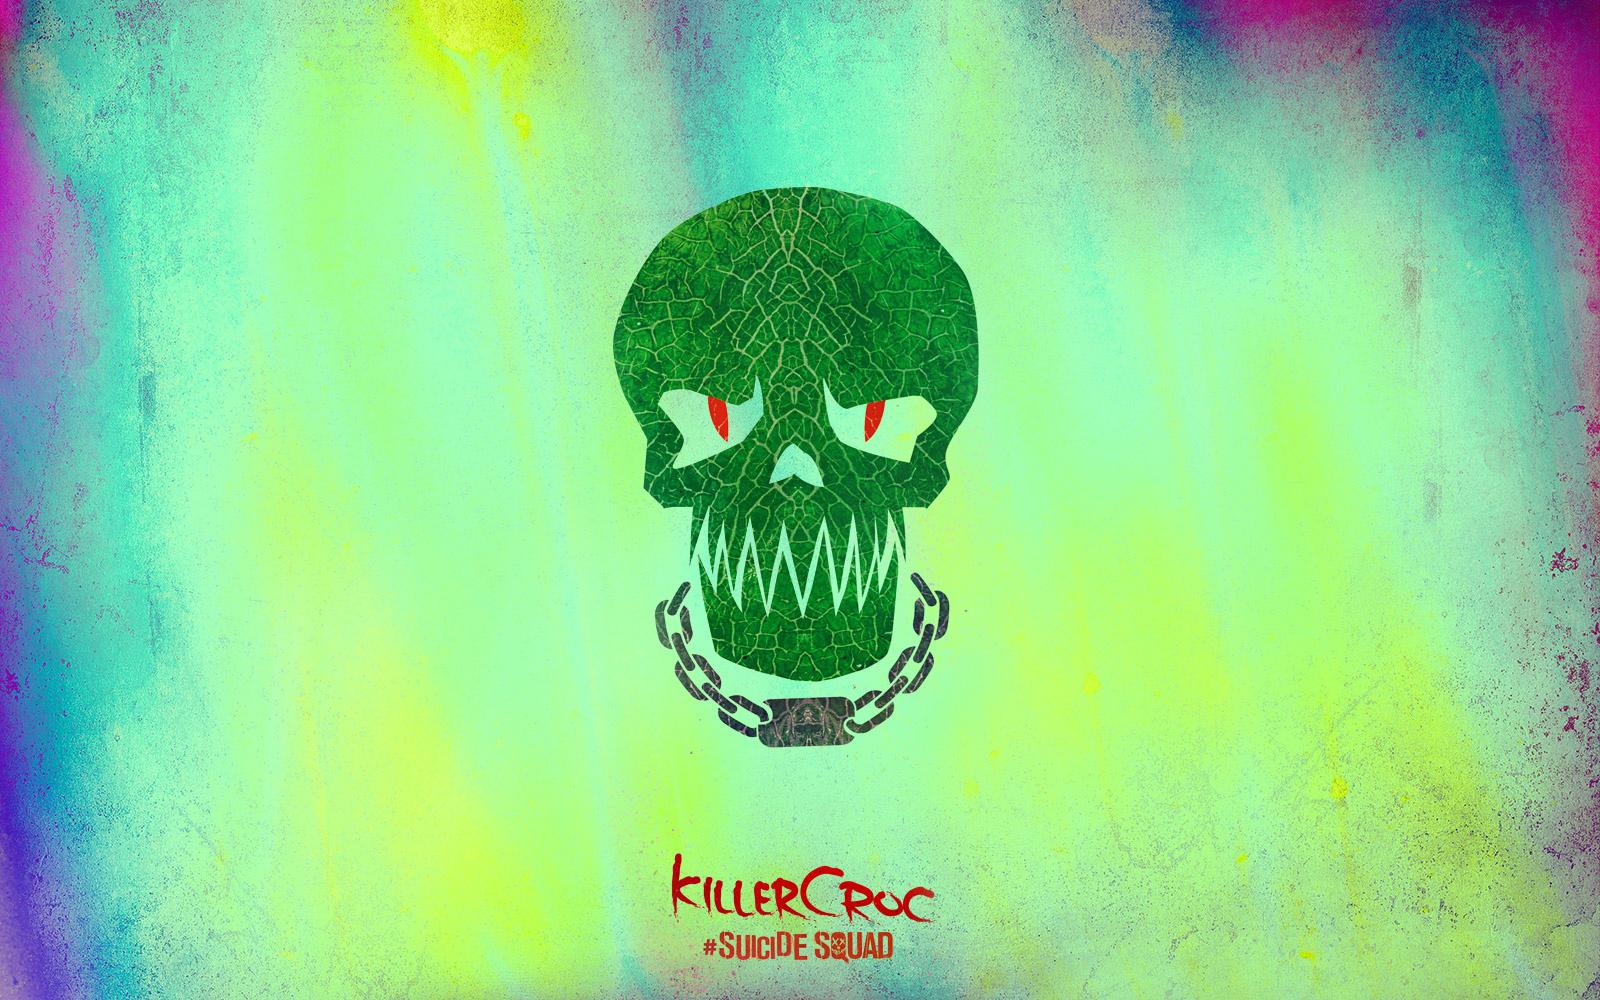 Download the cool, minimalist skull wallpaper from Suicide Squad